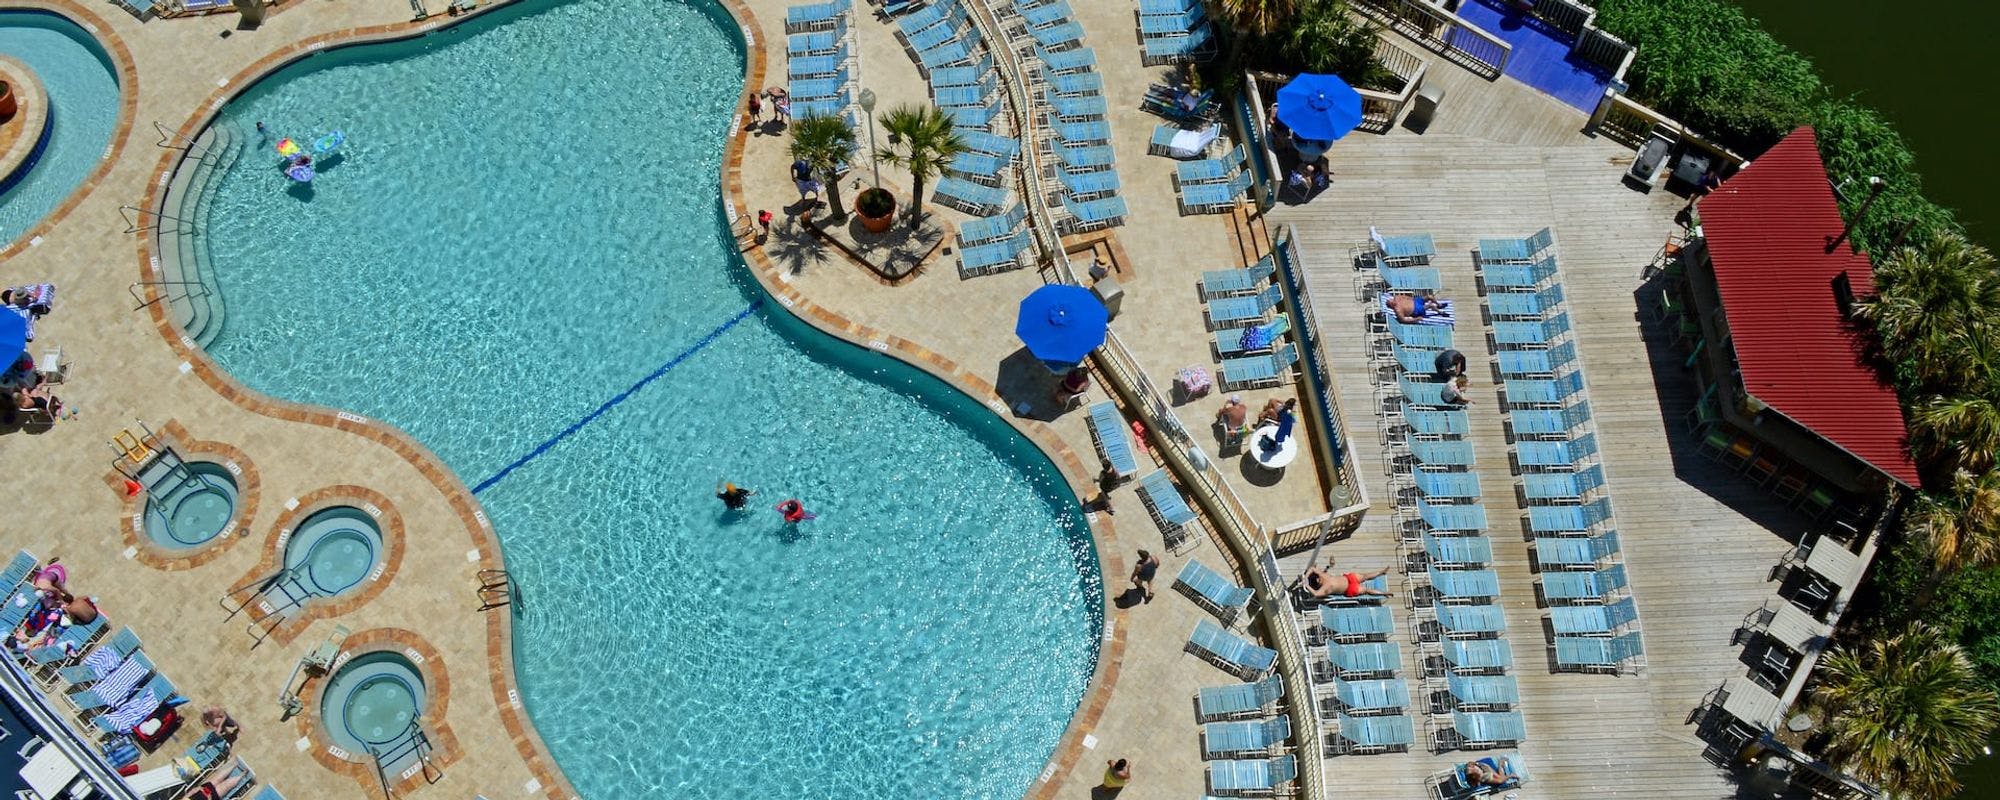 Aerial view of Myrtle Beach pool for vacation rental guests